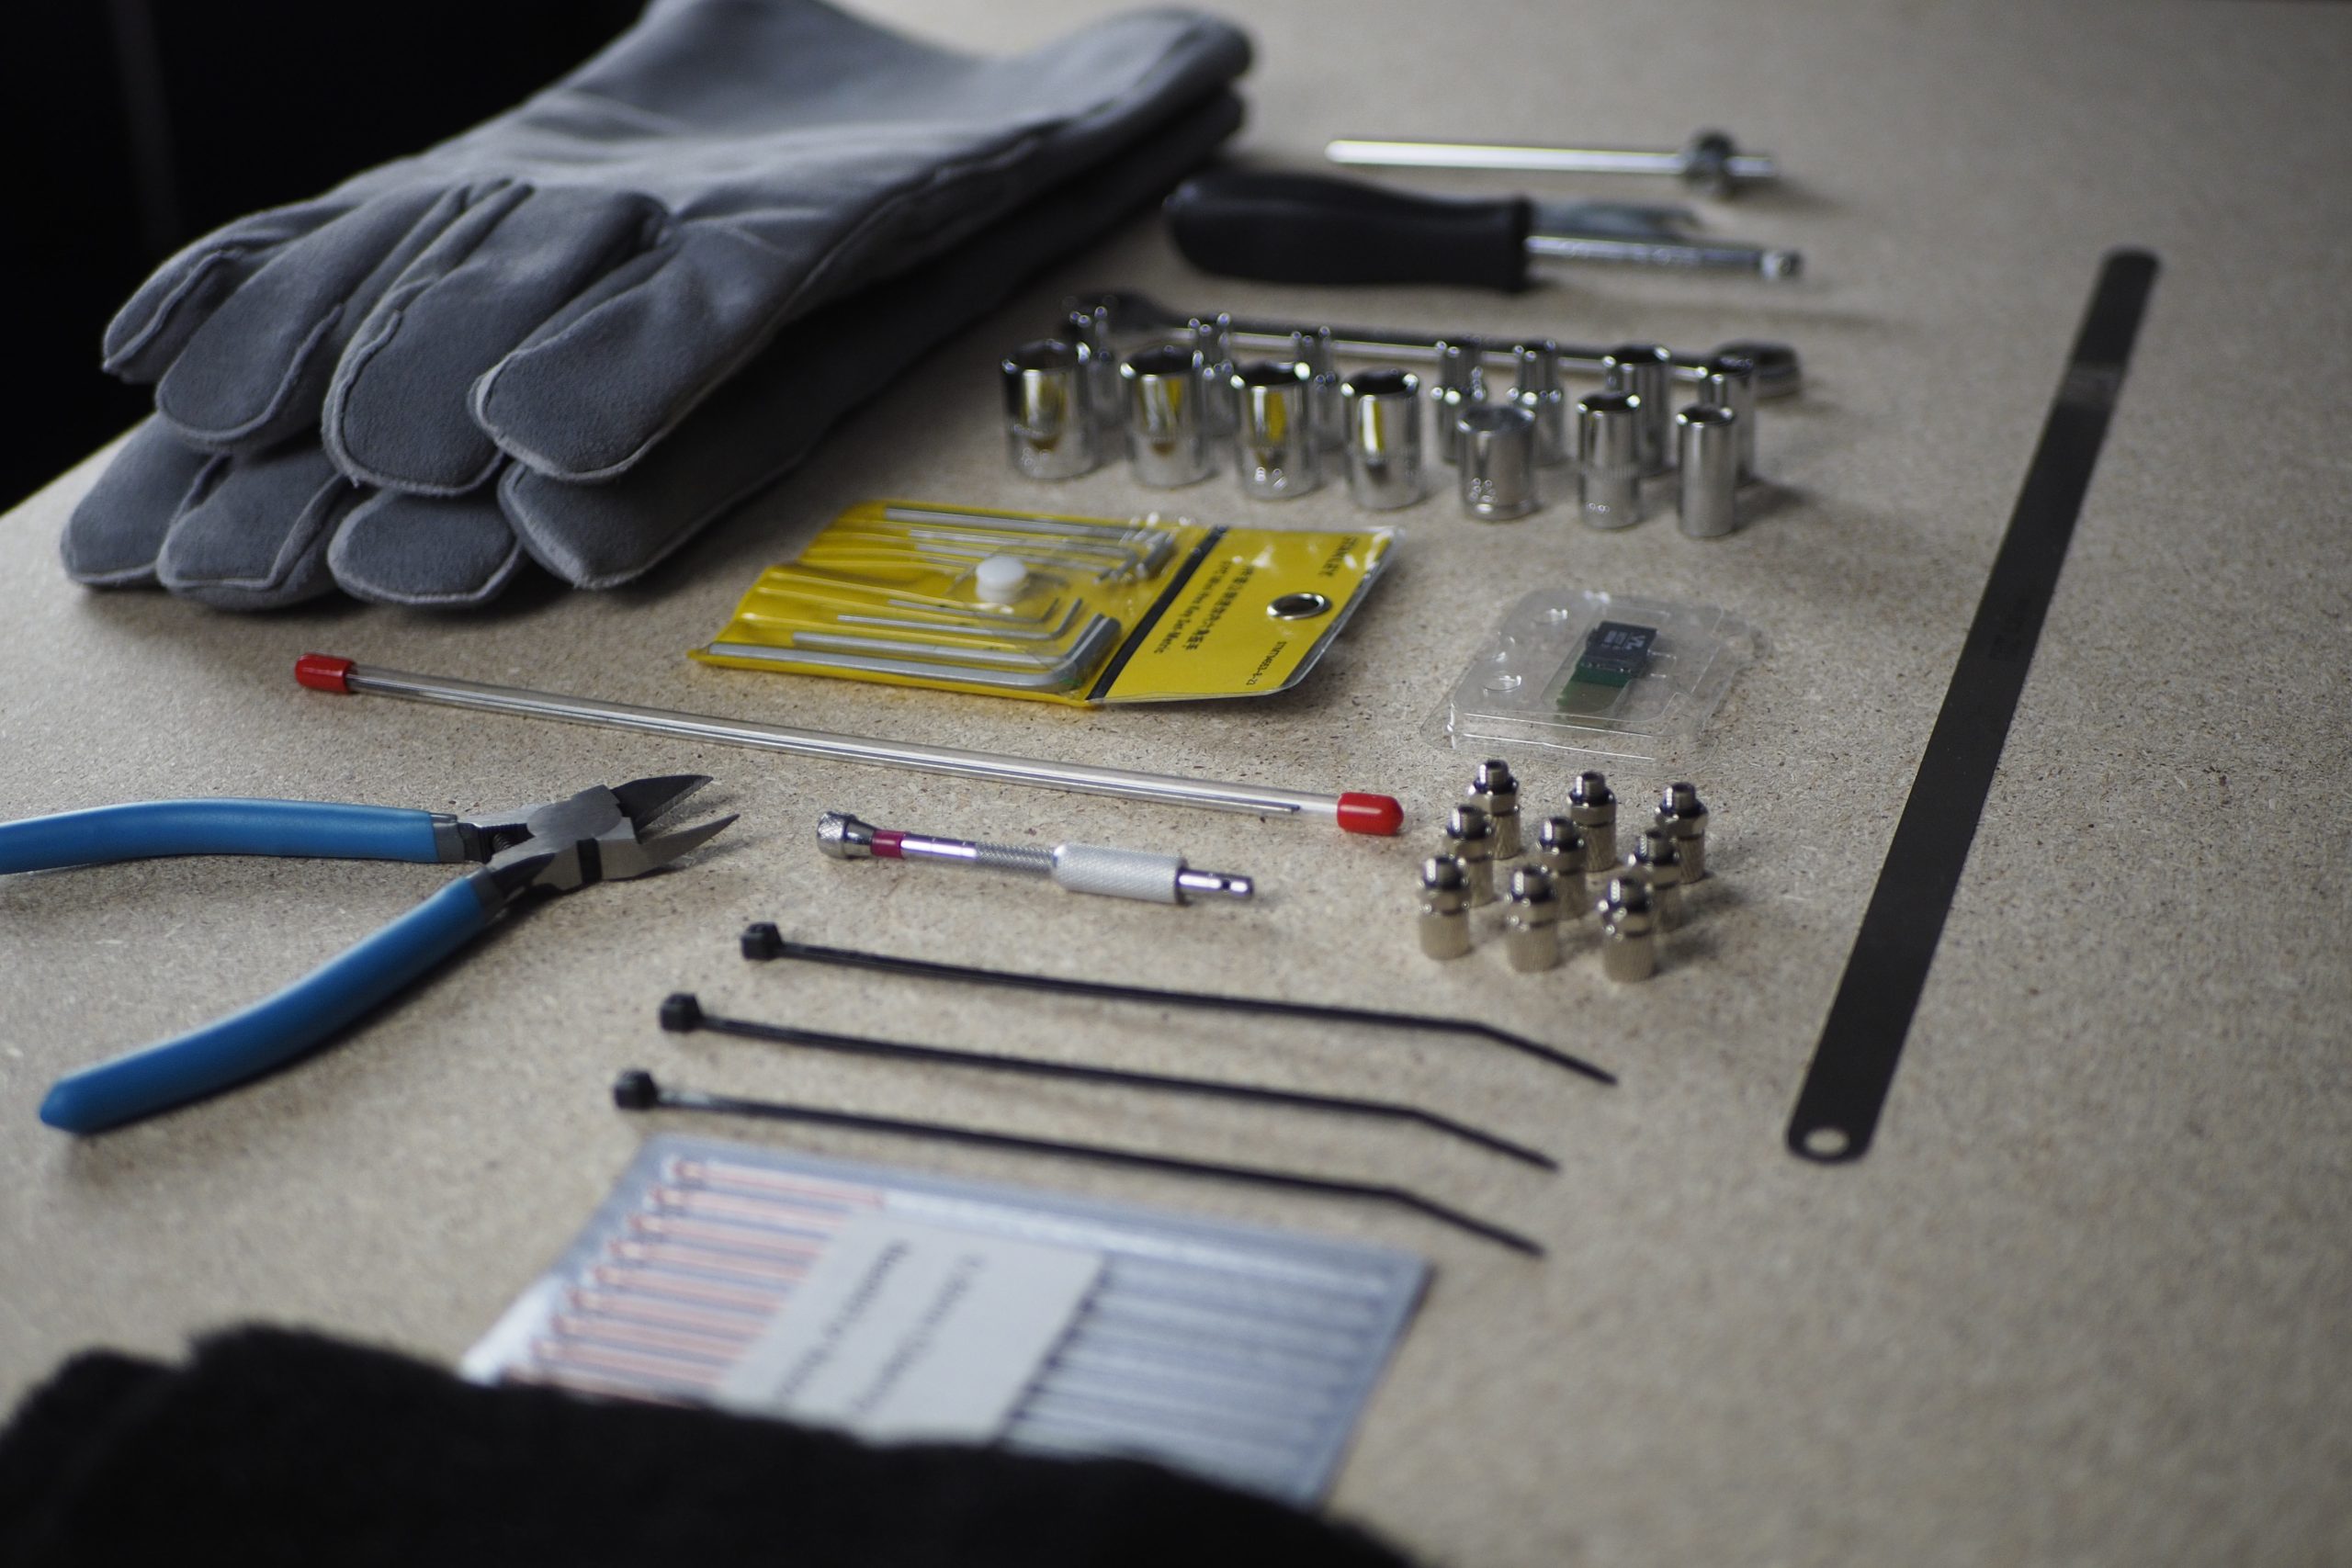 The build chamber and toolkit of the FUNMAT PRO 410. Photos by 3D Printing Industry.